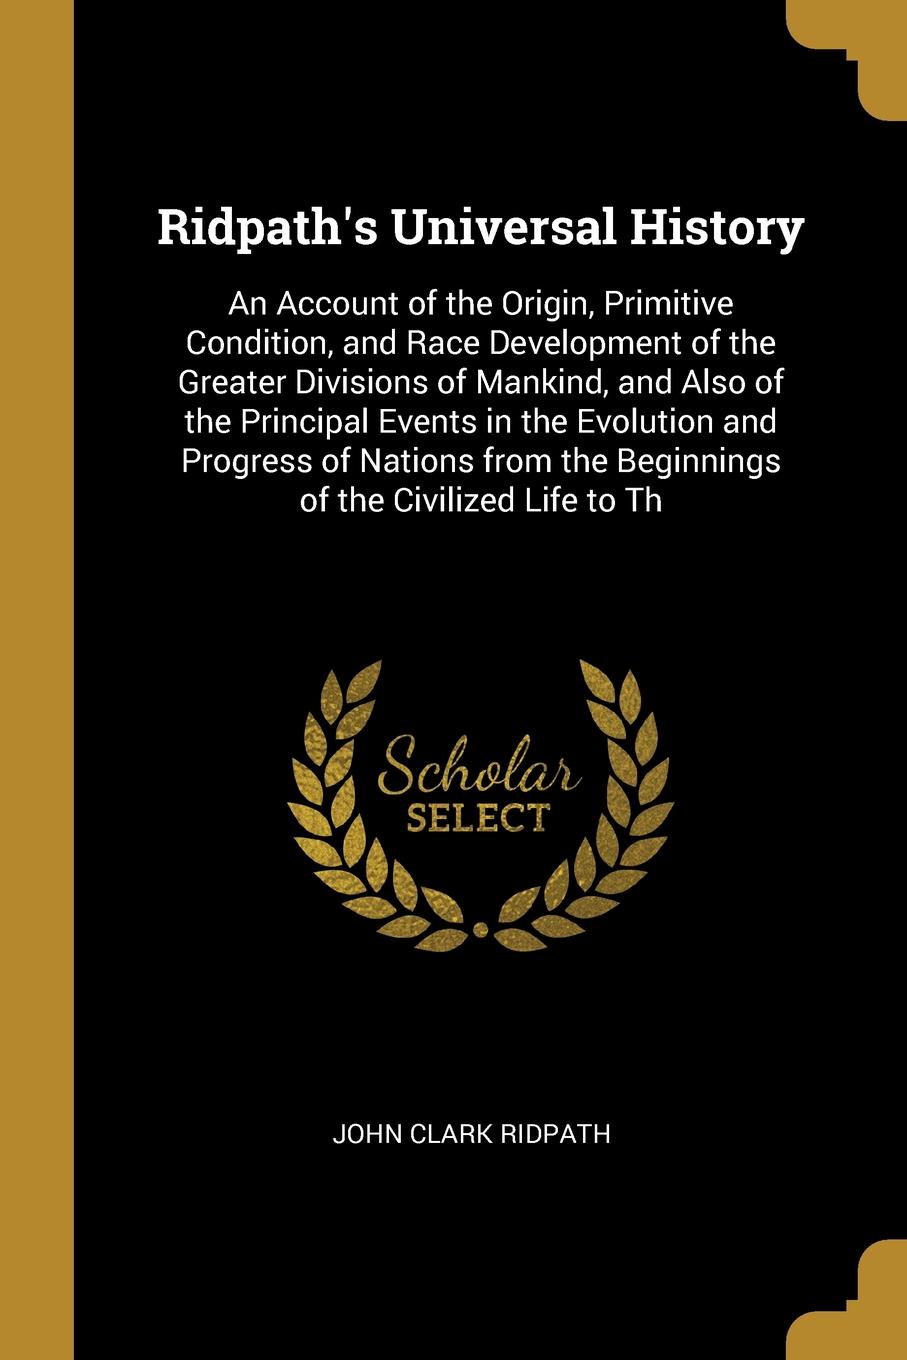 Ridpath`s Universal History. An Account of the Origin, Primitive Condition, and Race Development of the Greater Divisions of Mankind, and Also of the Principal Events in the Evolution and Progress of Nations from the Beginnings of the Civilized Li...